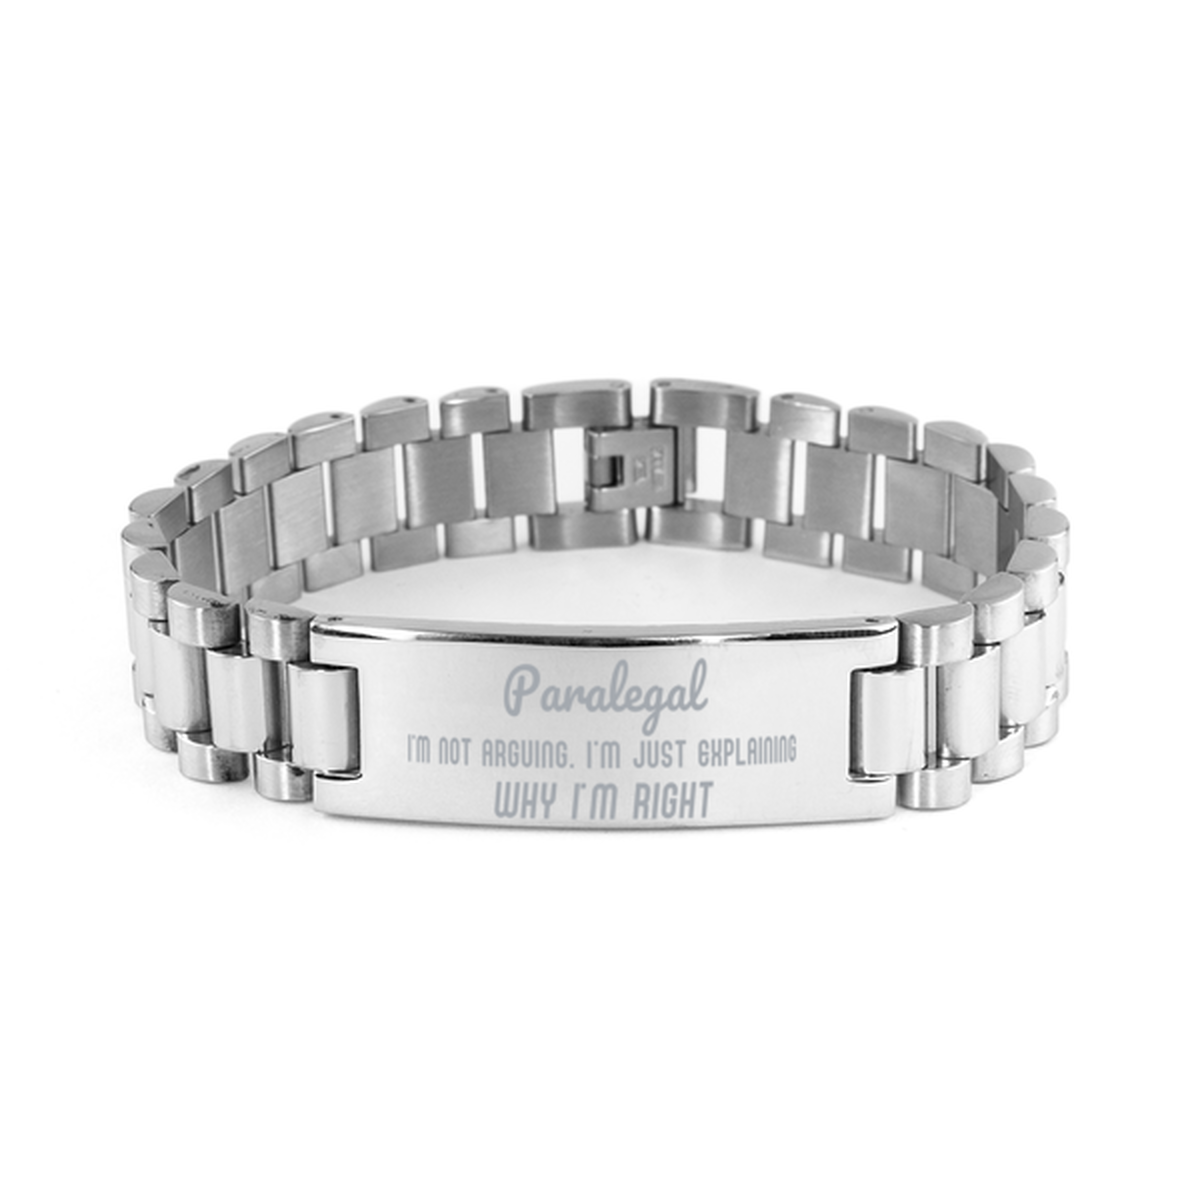 Paralegal I'm not Arguing. I'm Just Explaining Why I'm RIGHT Ladder Stainless Steel Bracelet, Graduation Birthday Christmas Paralegal Gifts For Paralegal Funny Saying Quote Present for Men Women Coworker